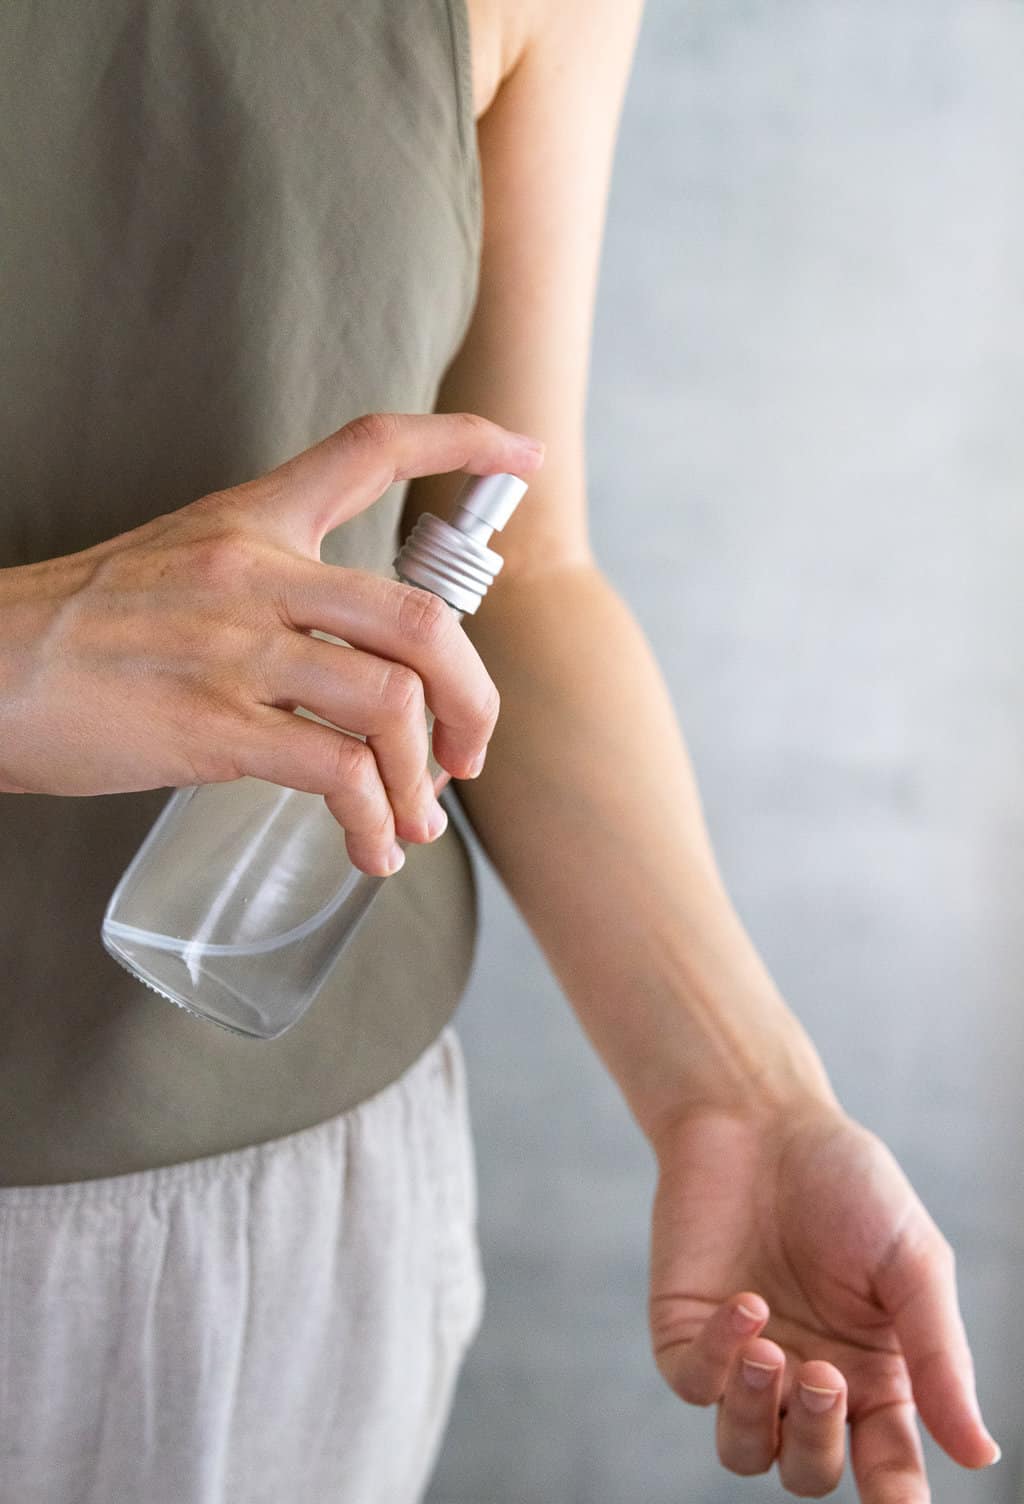 How to make a cooling body spray for summer